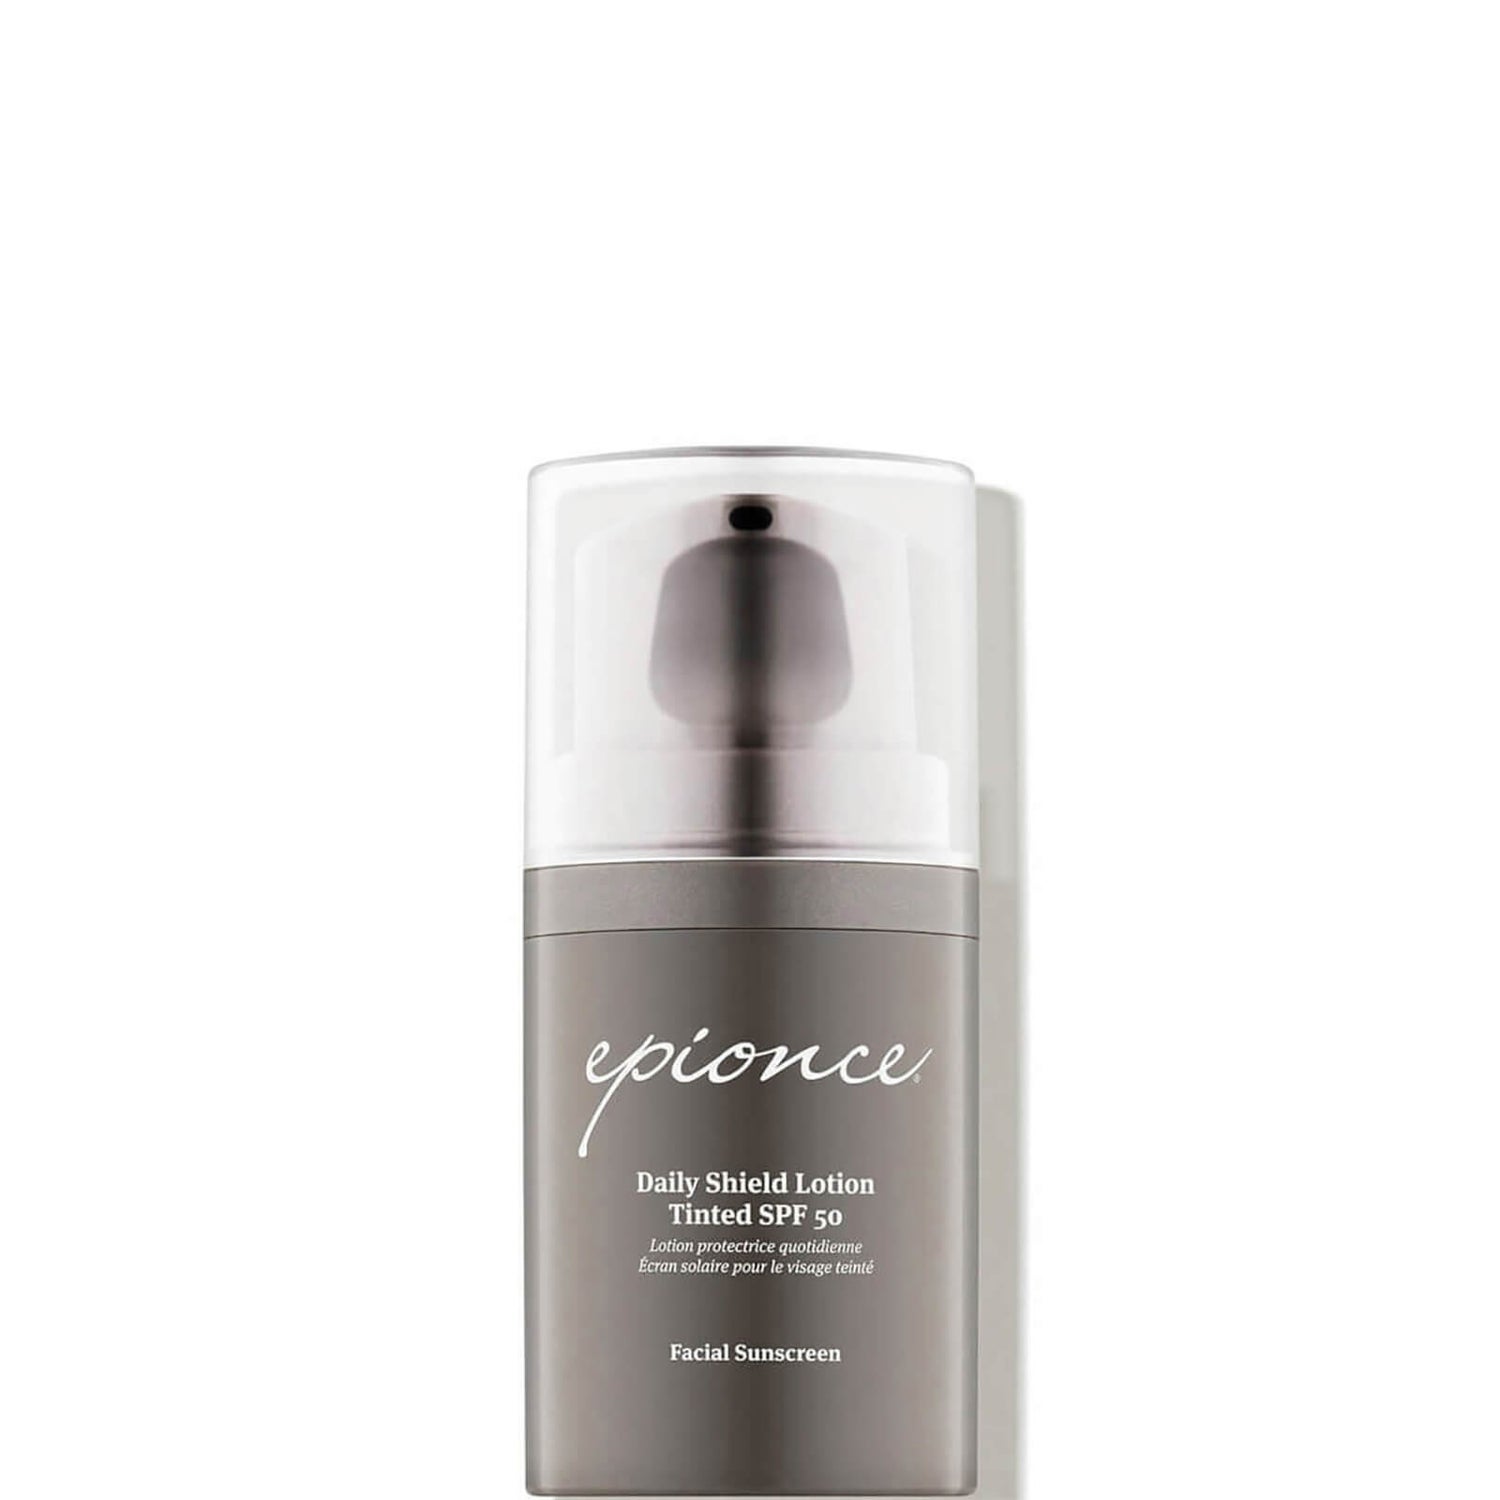 Epionce Daily Shield Tinted SPF50 Lotion 1.7oz